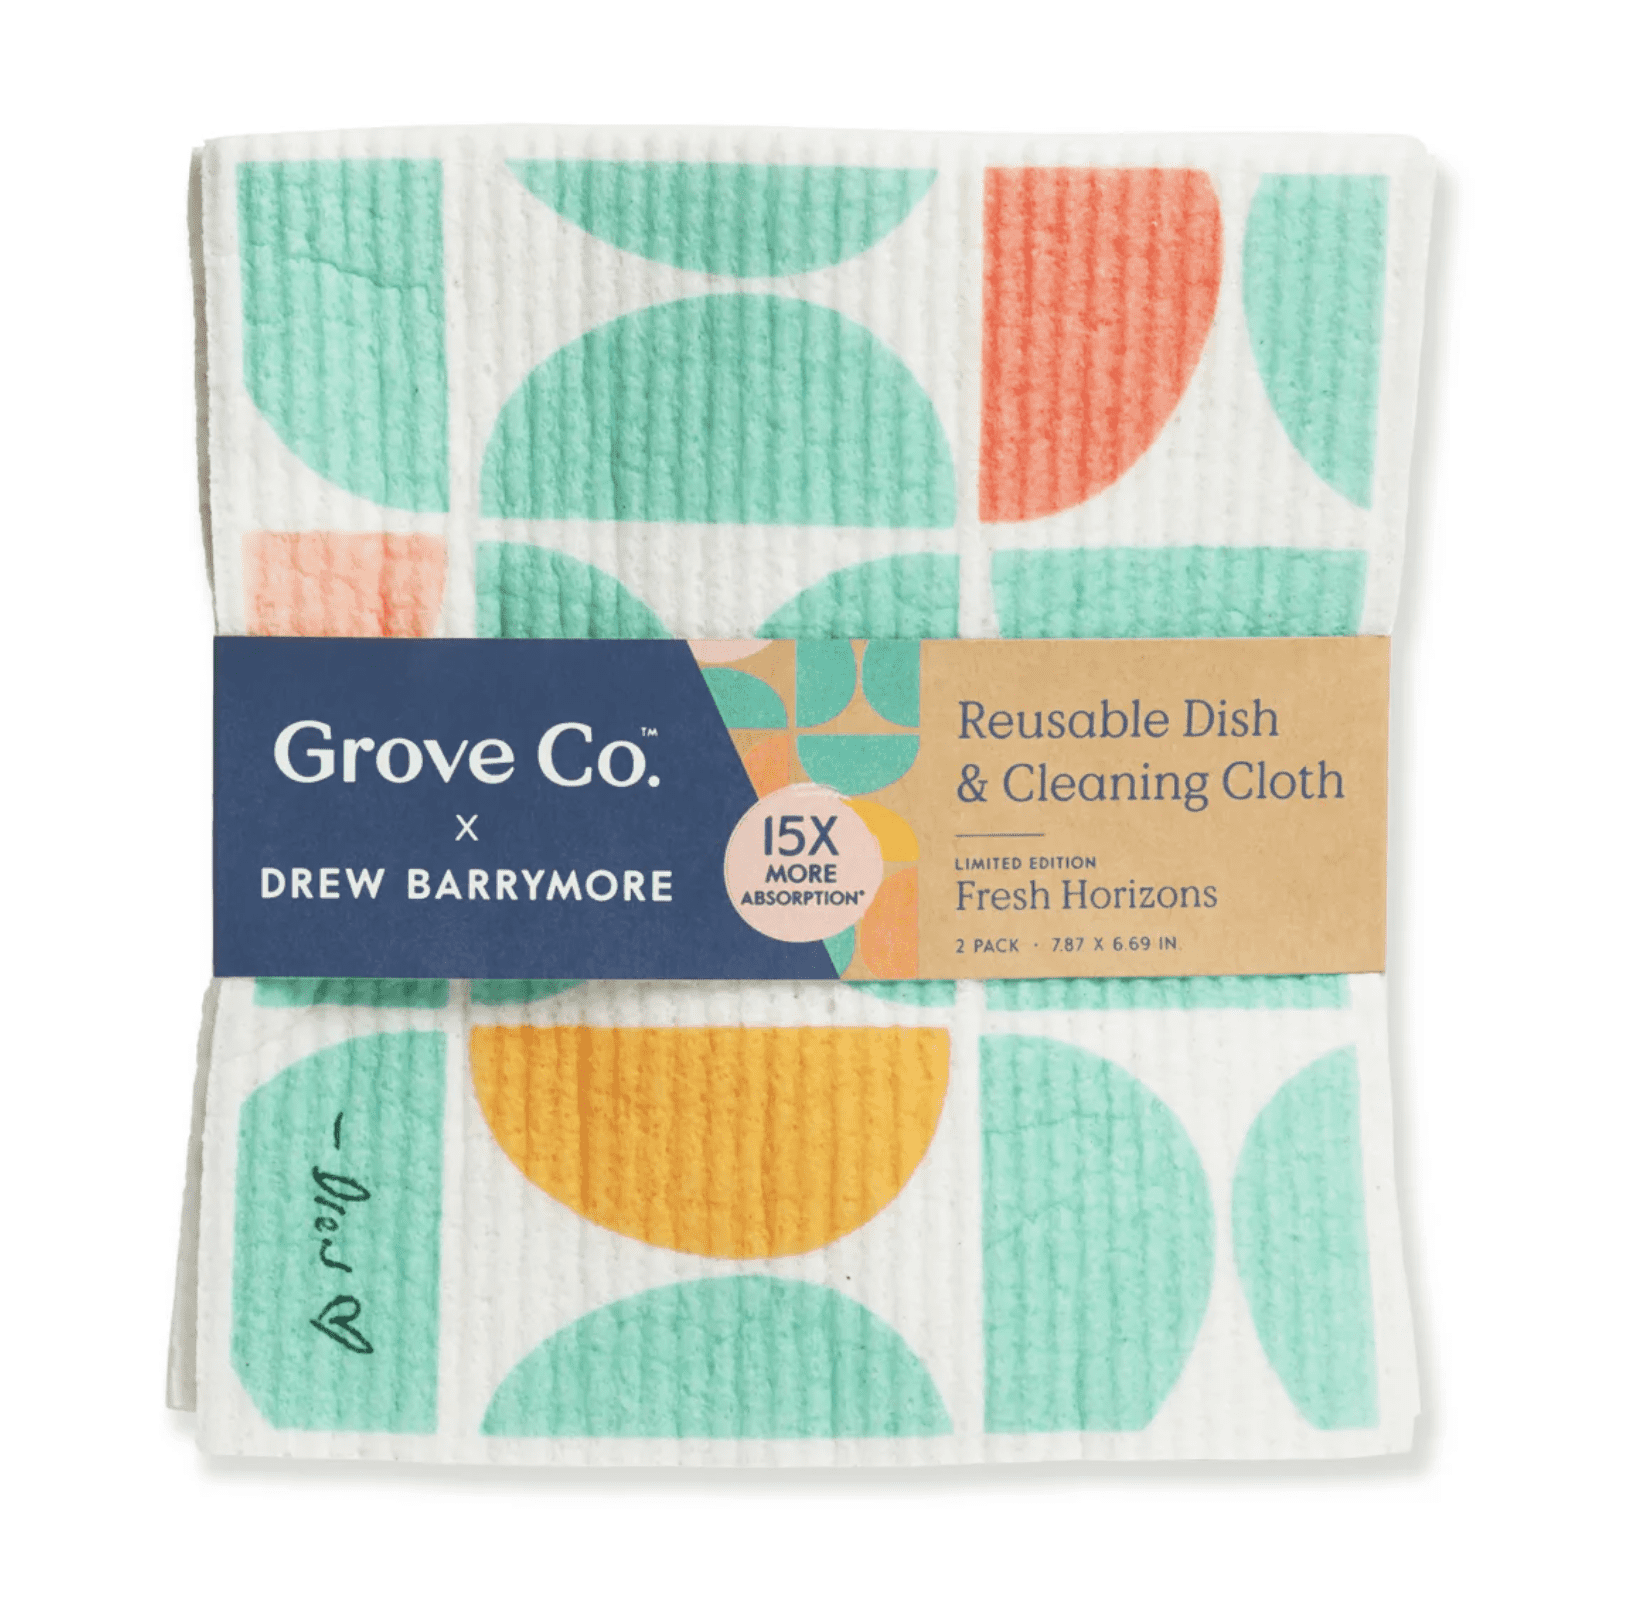 My Honest Review of Drew Barrymore's $10 Reusable Dish Cloths